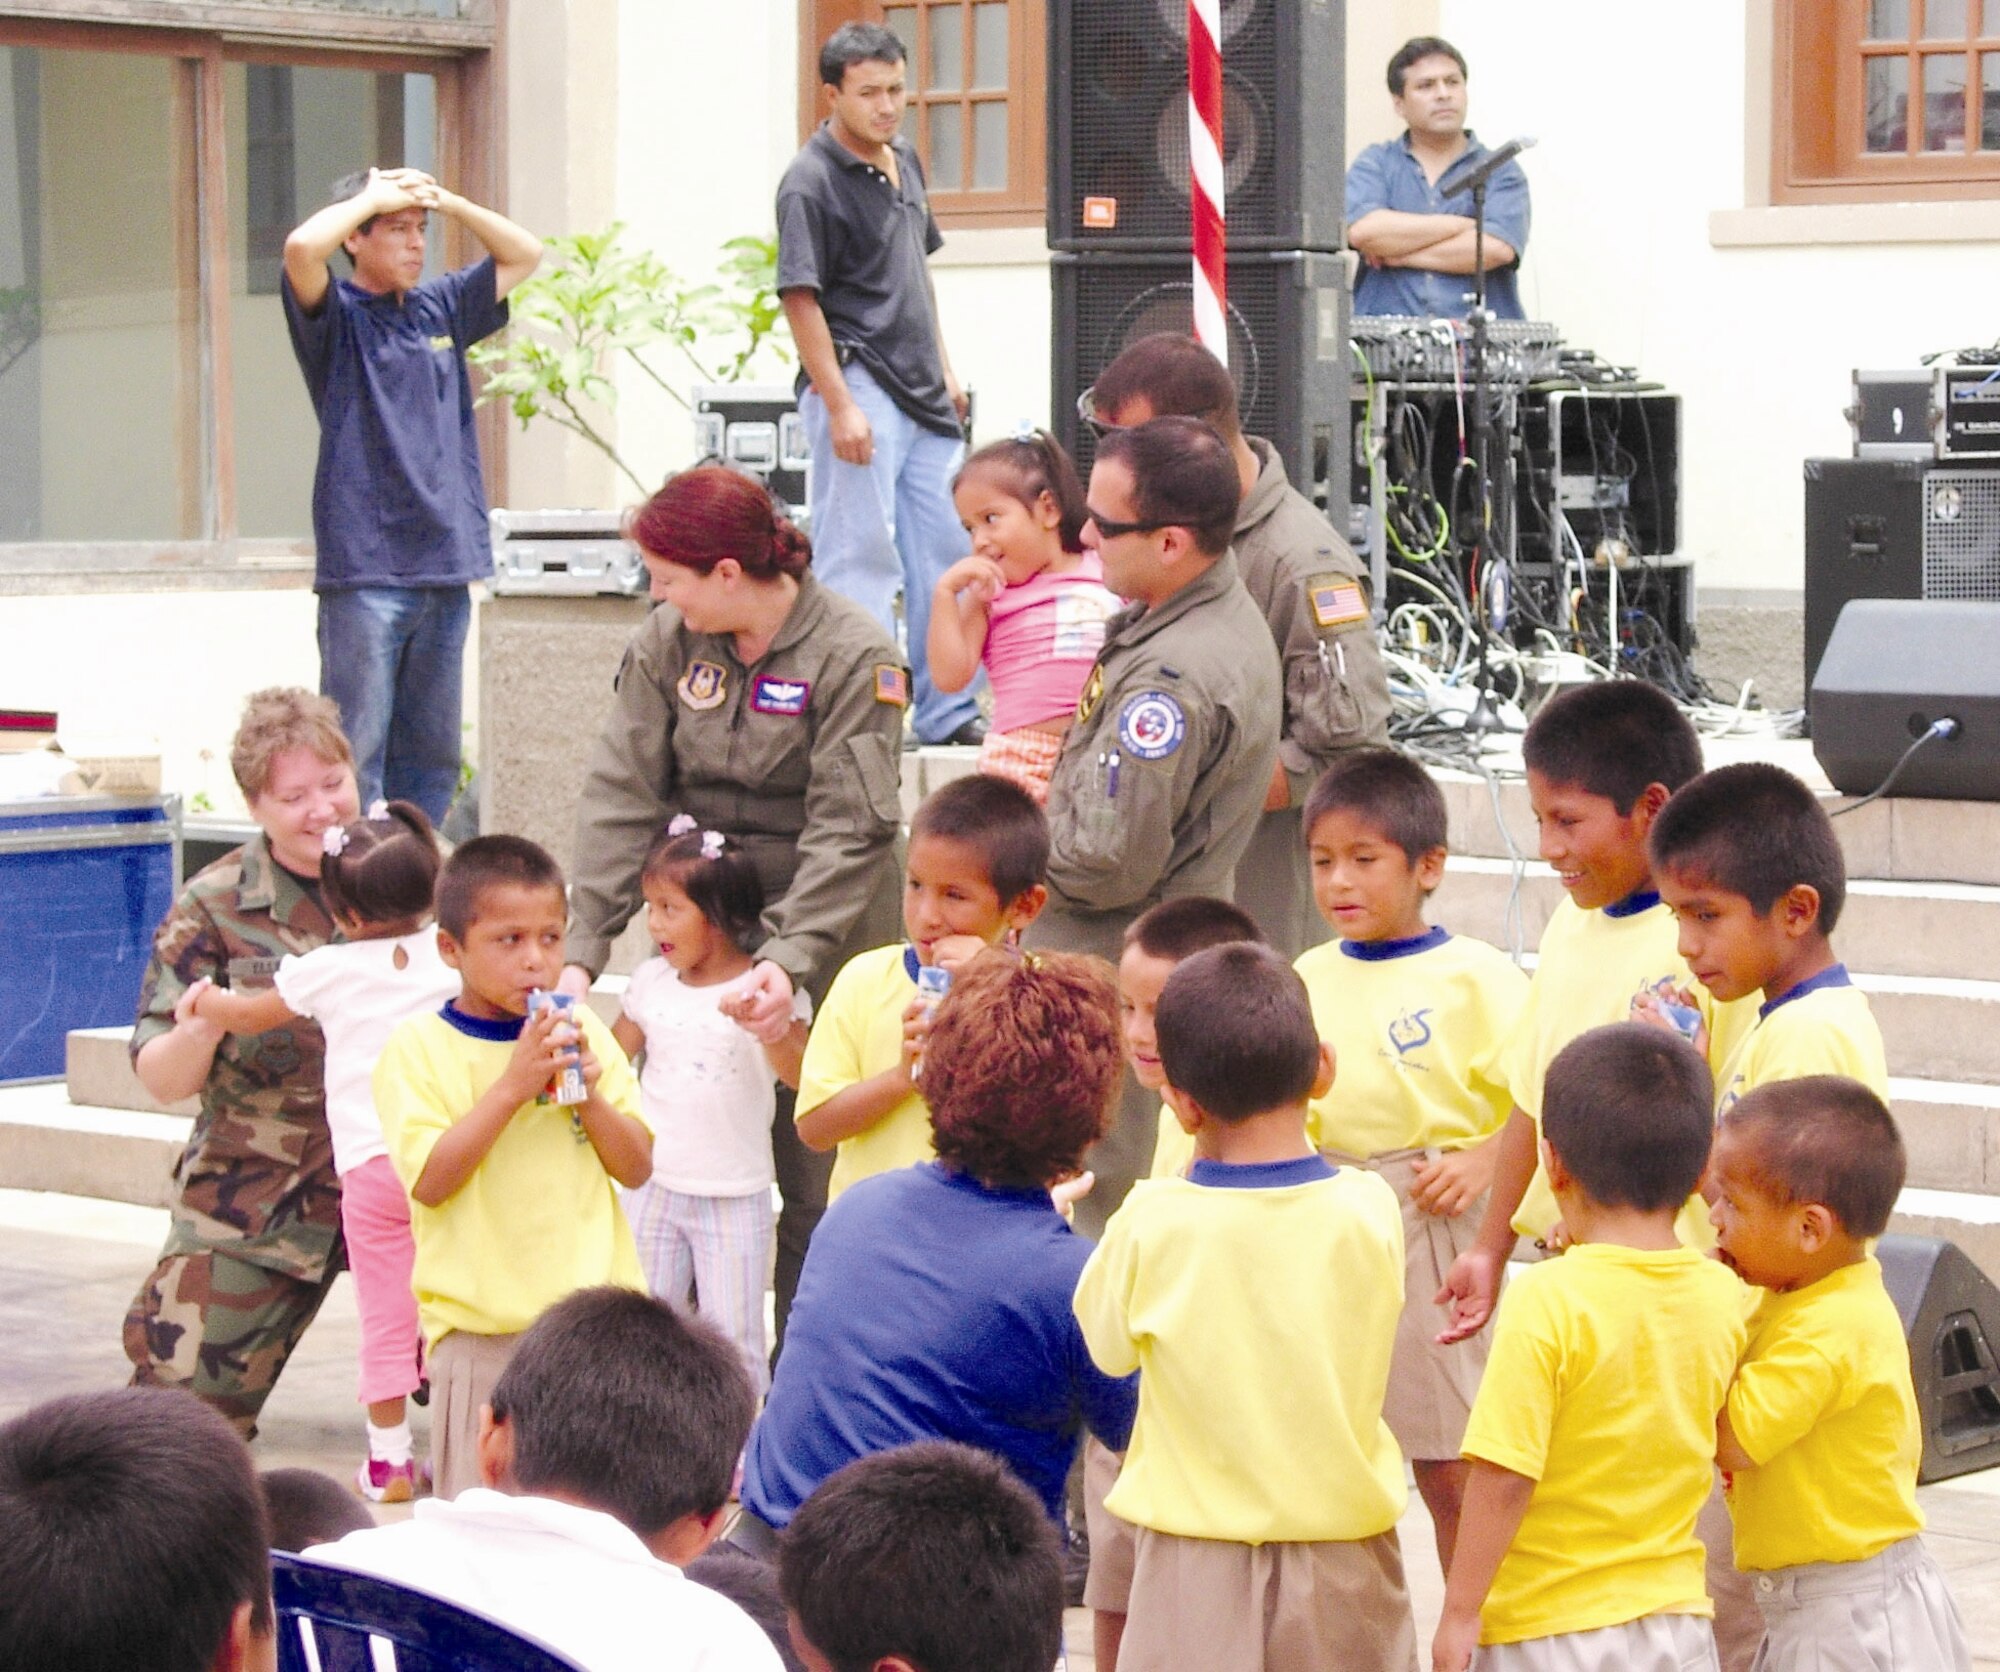 Aircrew members, including some from the 336th Air Refueling Squadron, visit with children at a local foster home Feb. 16 at Lima, Peru. Airmen in Peru wrapped up joint exercises Falcon and Condor 2007 and were remaining there for the first joint air
show with the Peruvian Air Force. The joint exercise and air show directly support U.S. Southern Command’s engagement goals and further relations between allied nations. (Courtesy photo)